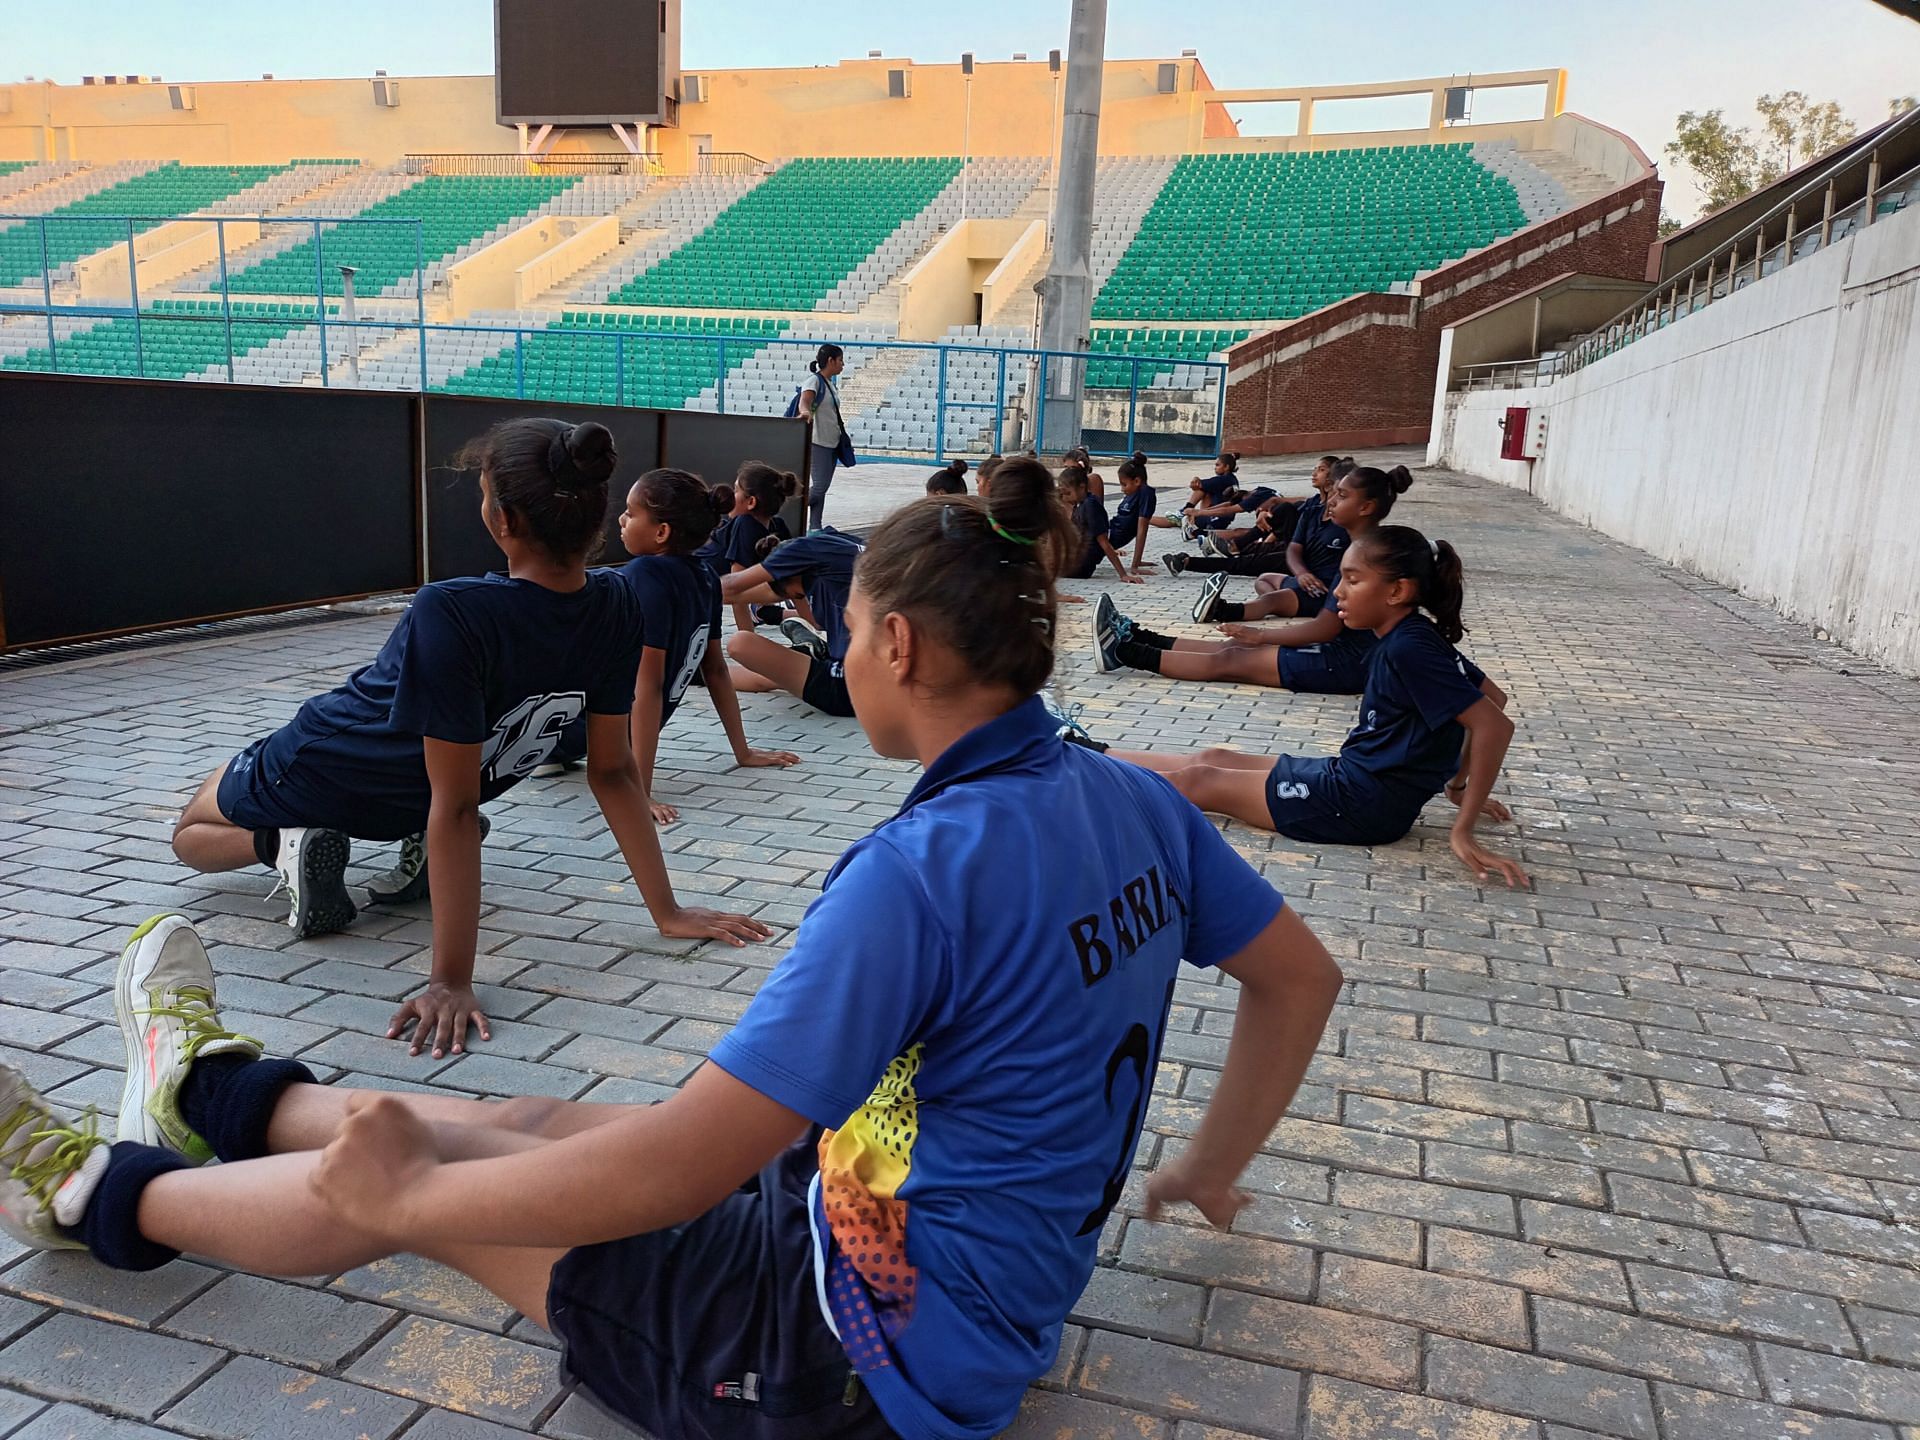 Sports Authority of Gujarat Academy players going through cool down routine after their match on Thursday in the Khelo India U-16 tournament